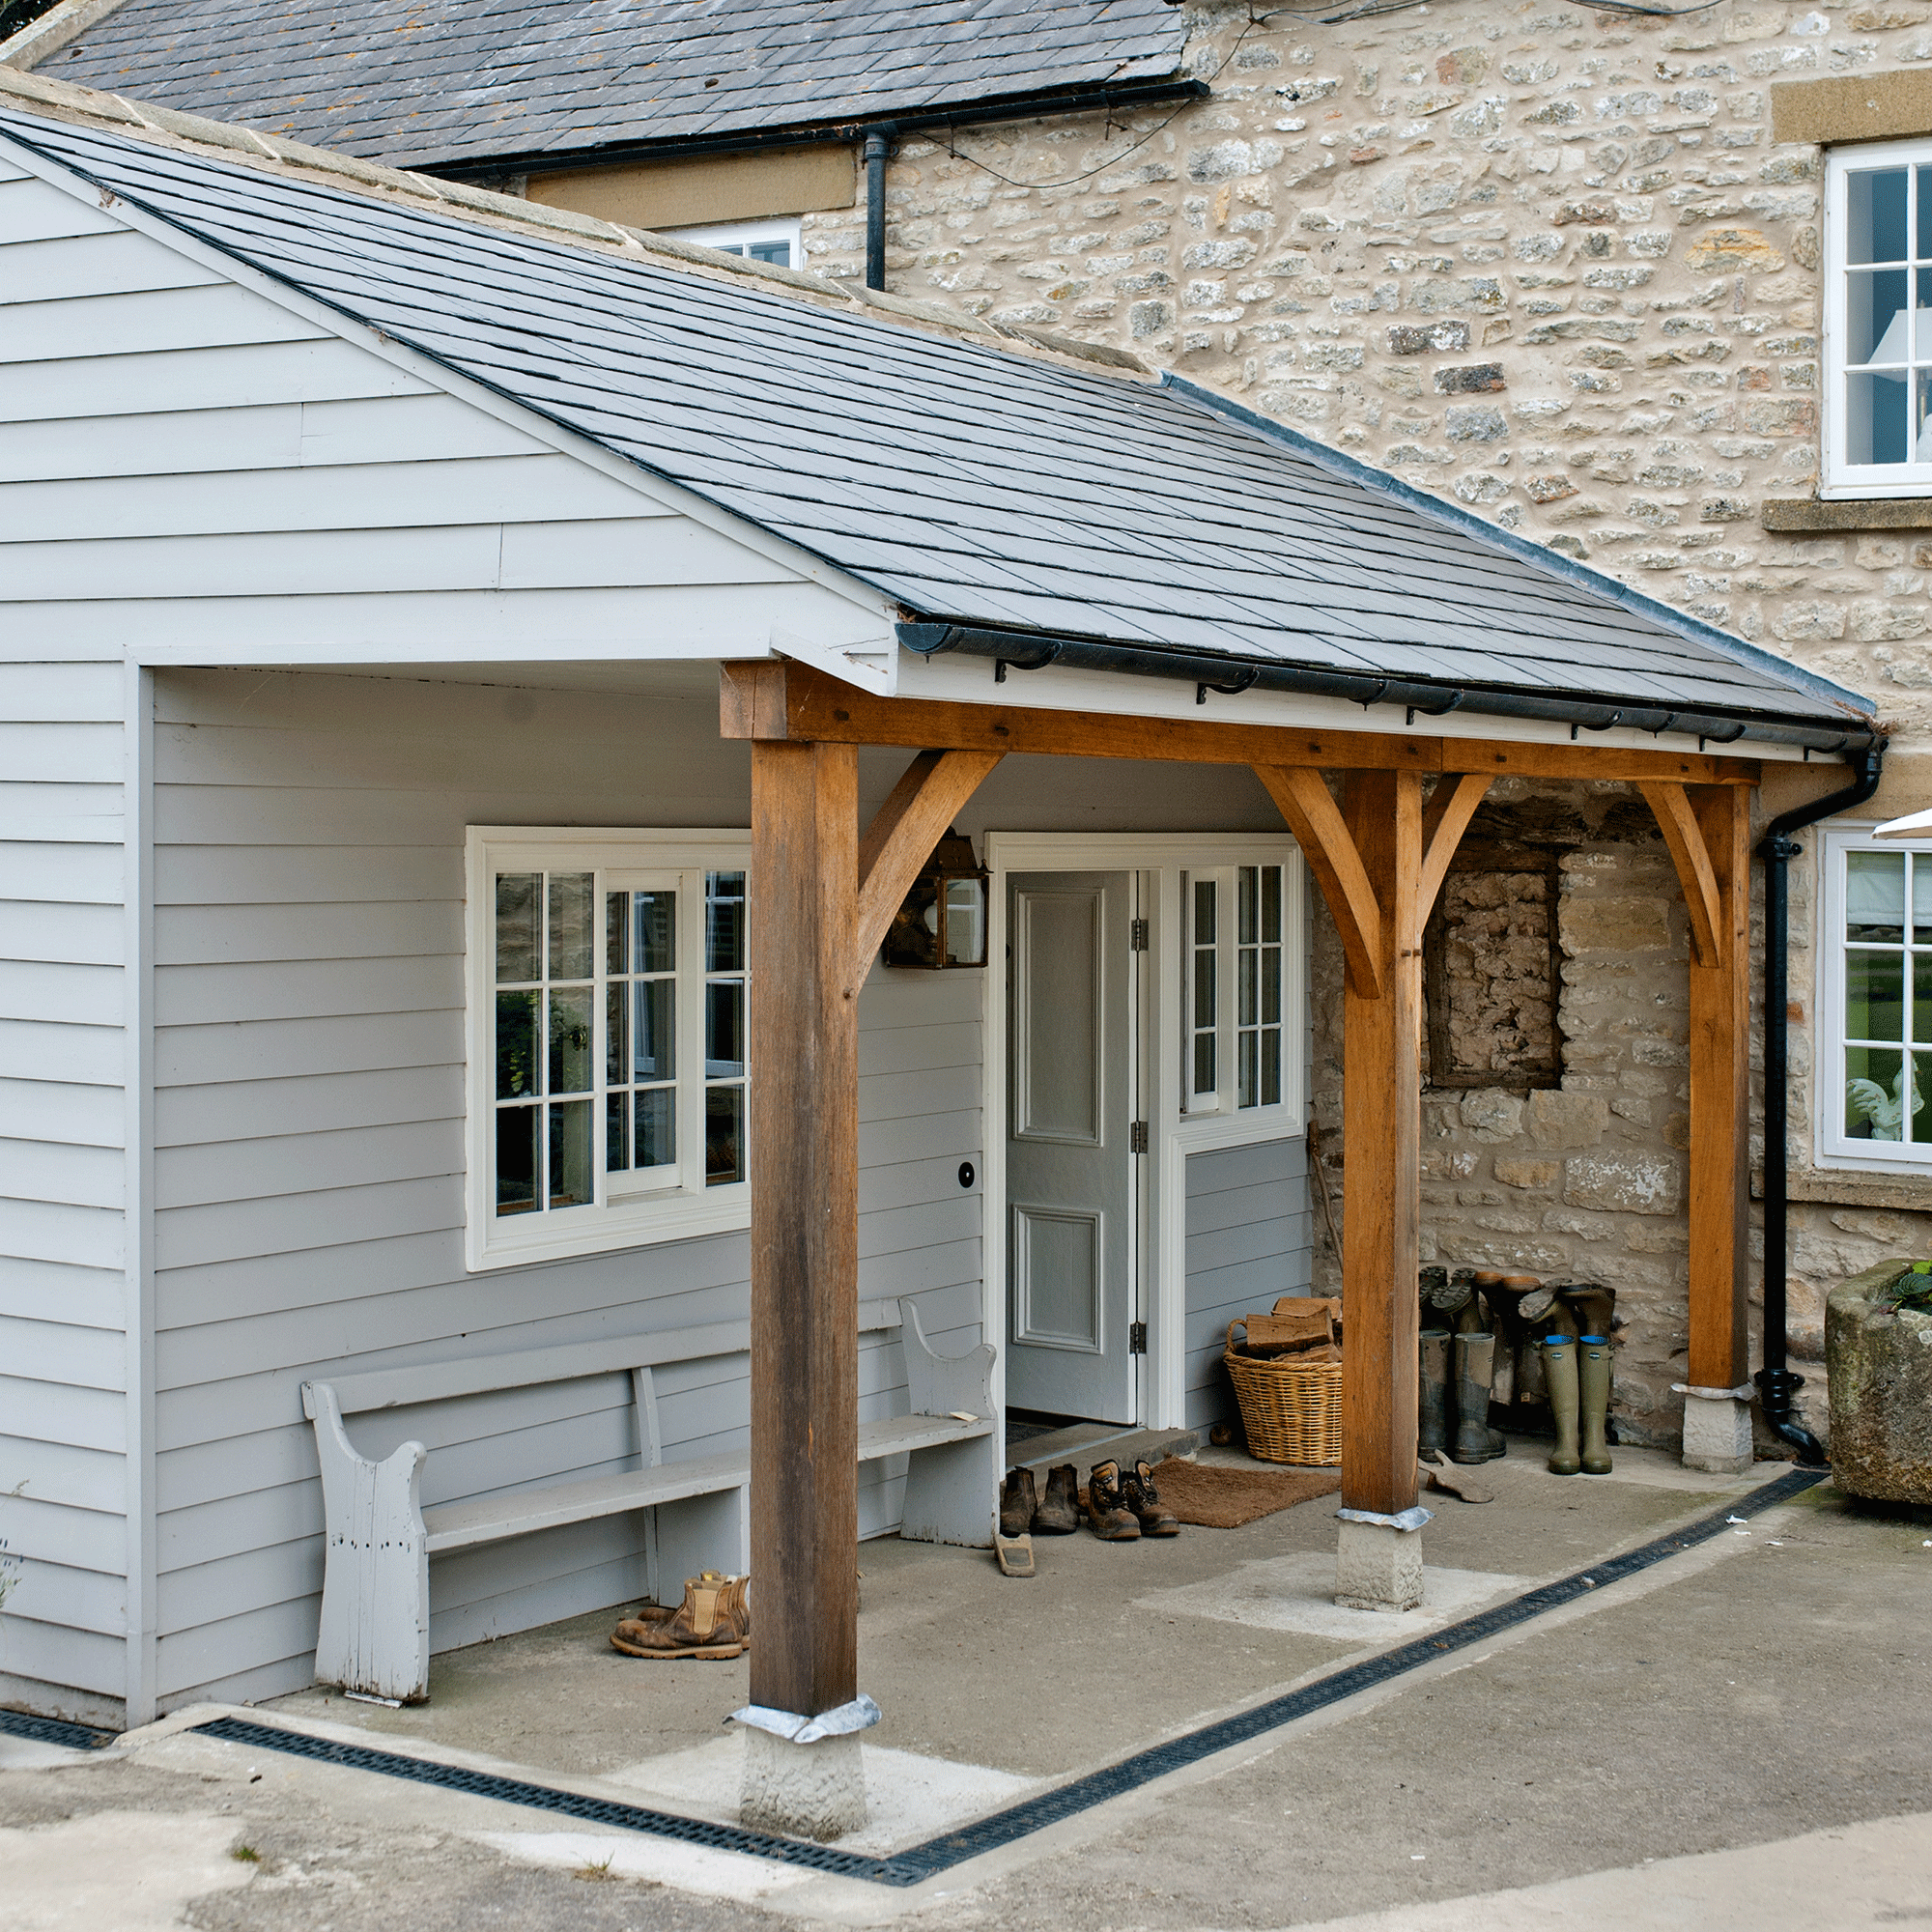 Do you need planning permission for a porch? The rules you need to follow